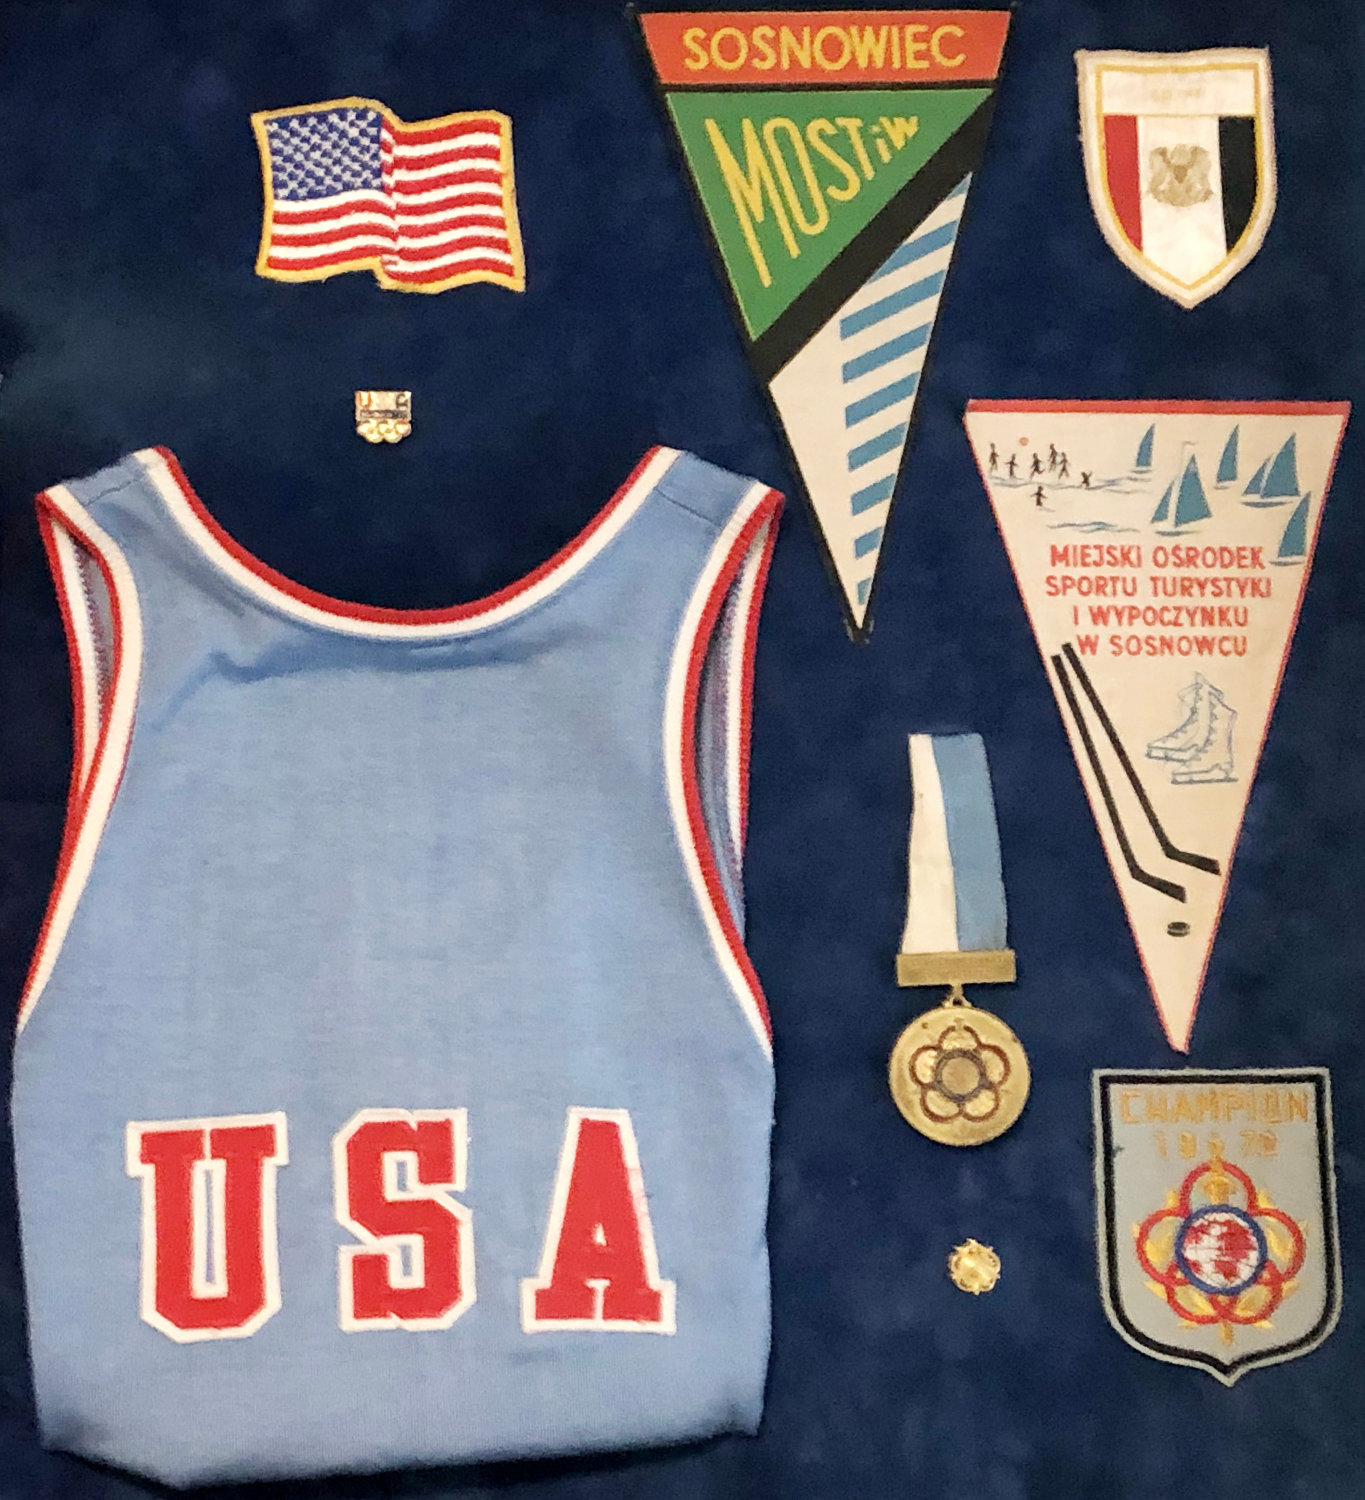 Memorabilia from some of Nick Wells’ travels as he fought for the United States in international competition.